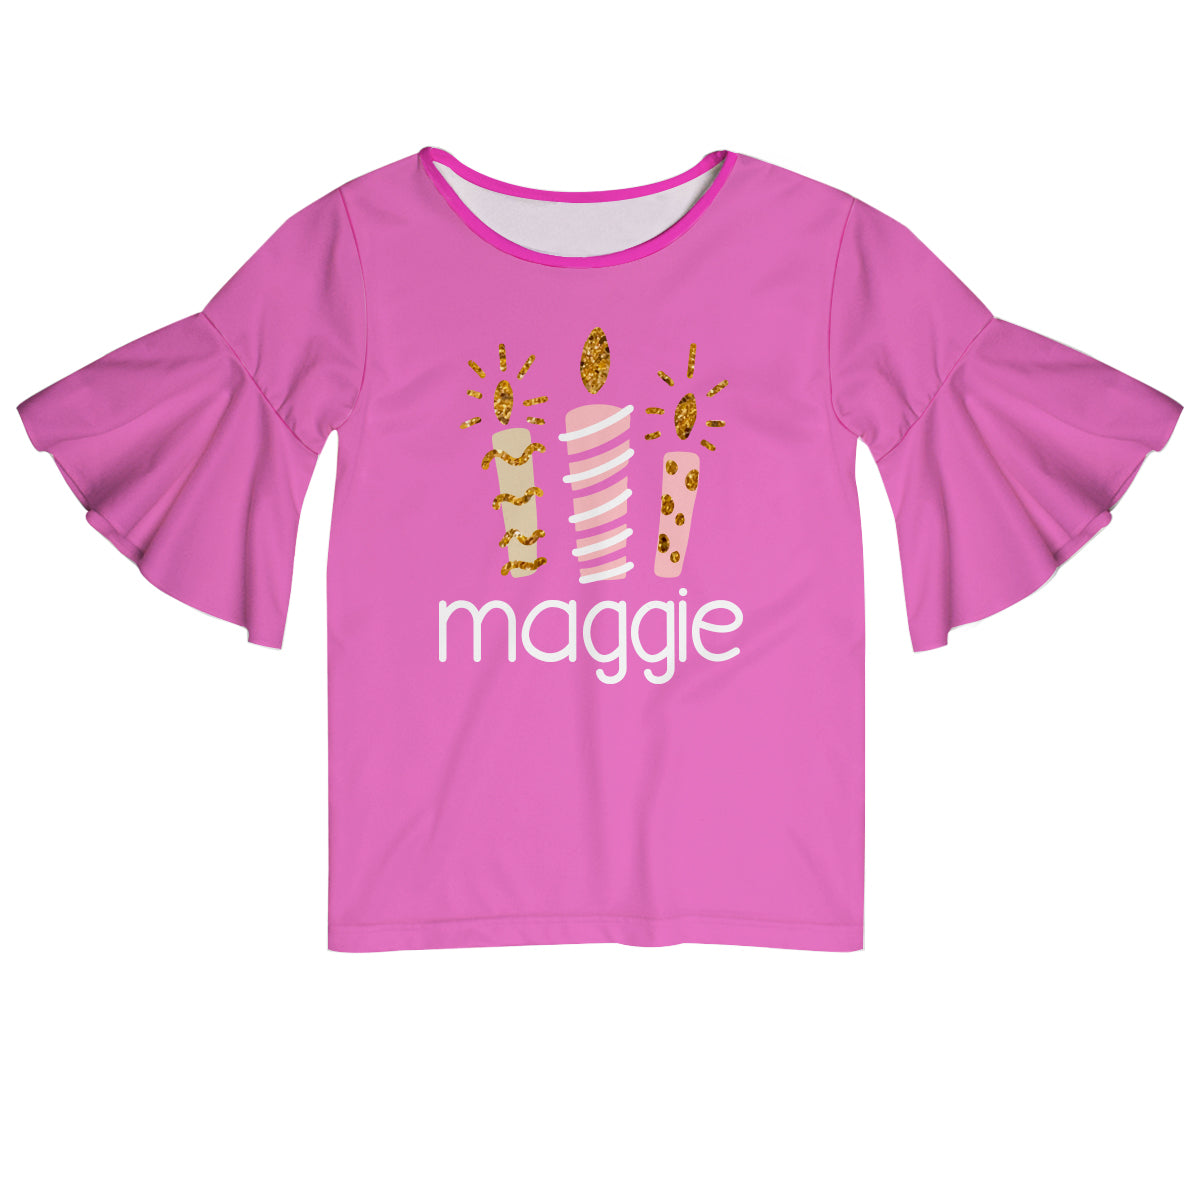 BIrthday Candles Name Pink Short Sleeve Ruffle Top